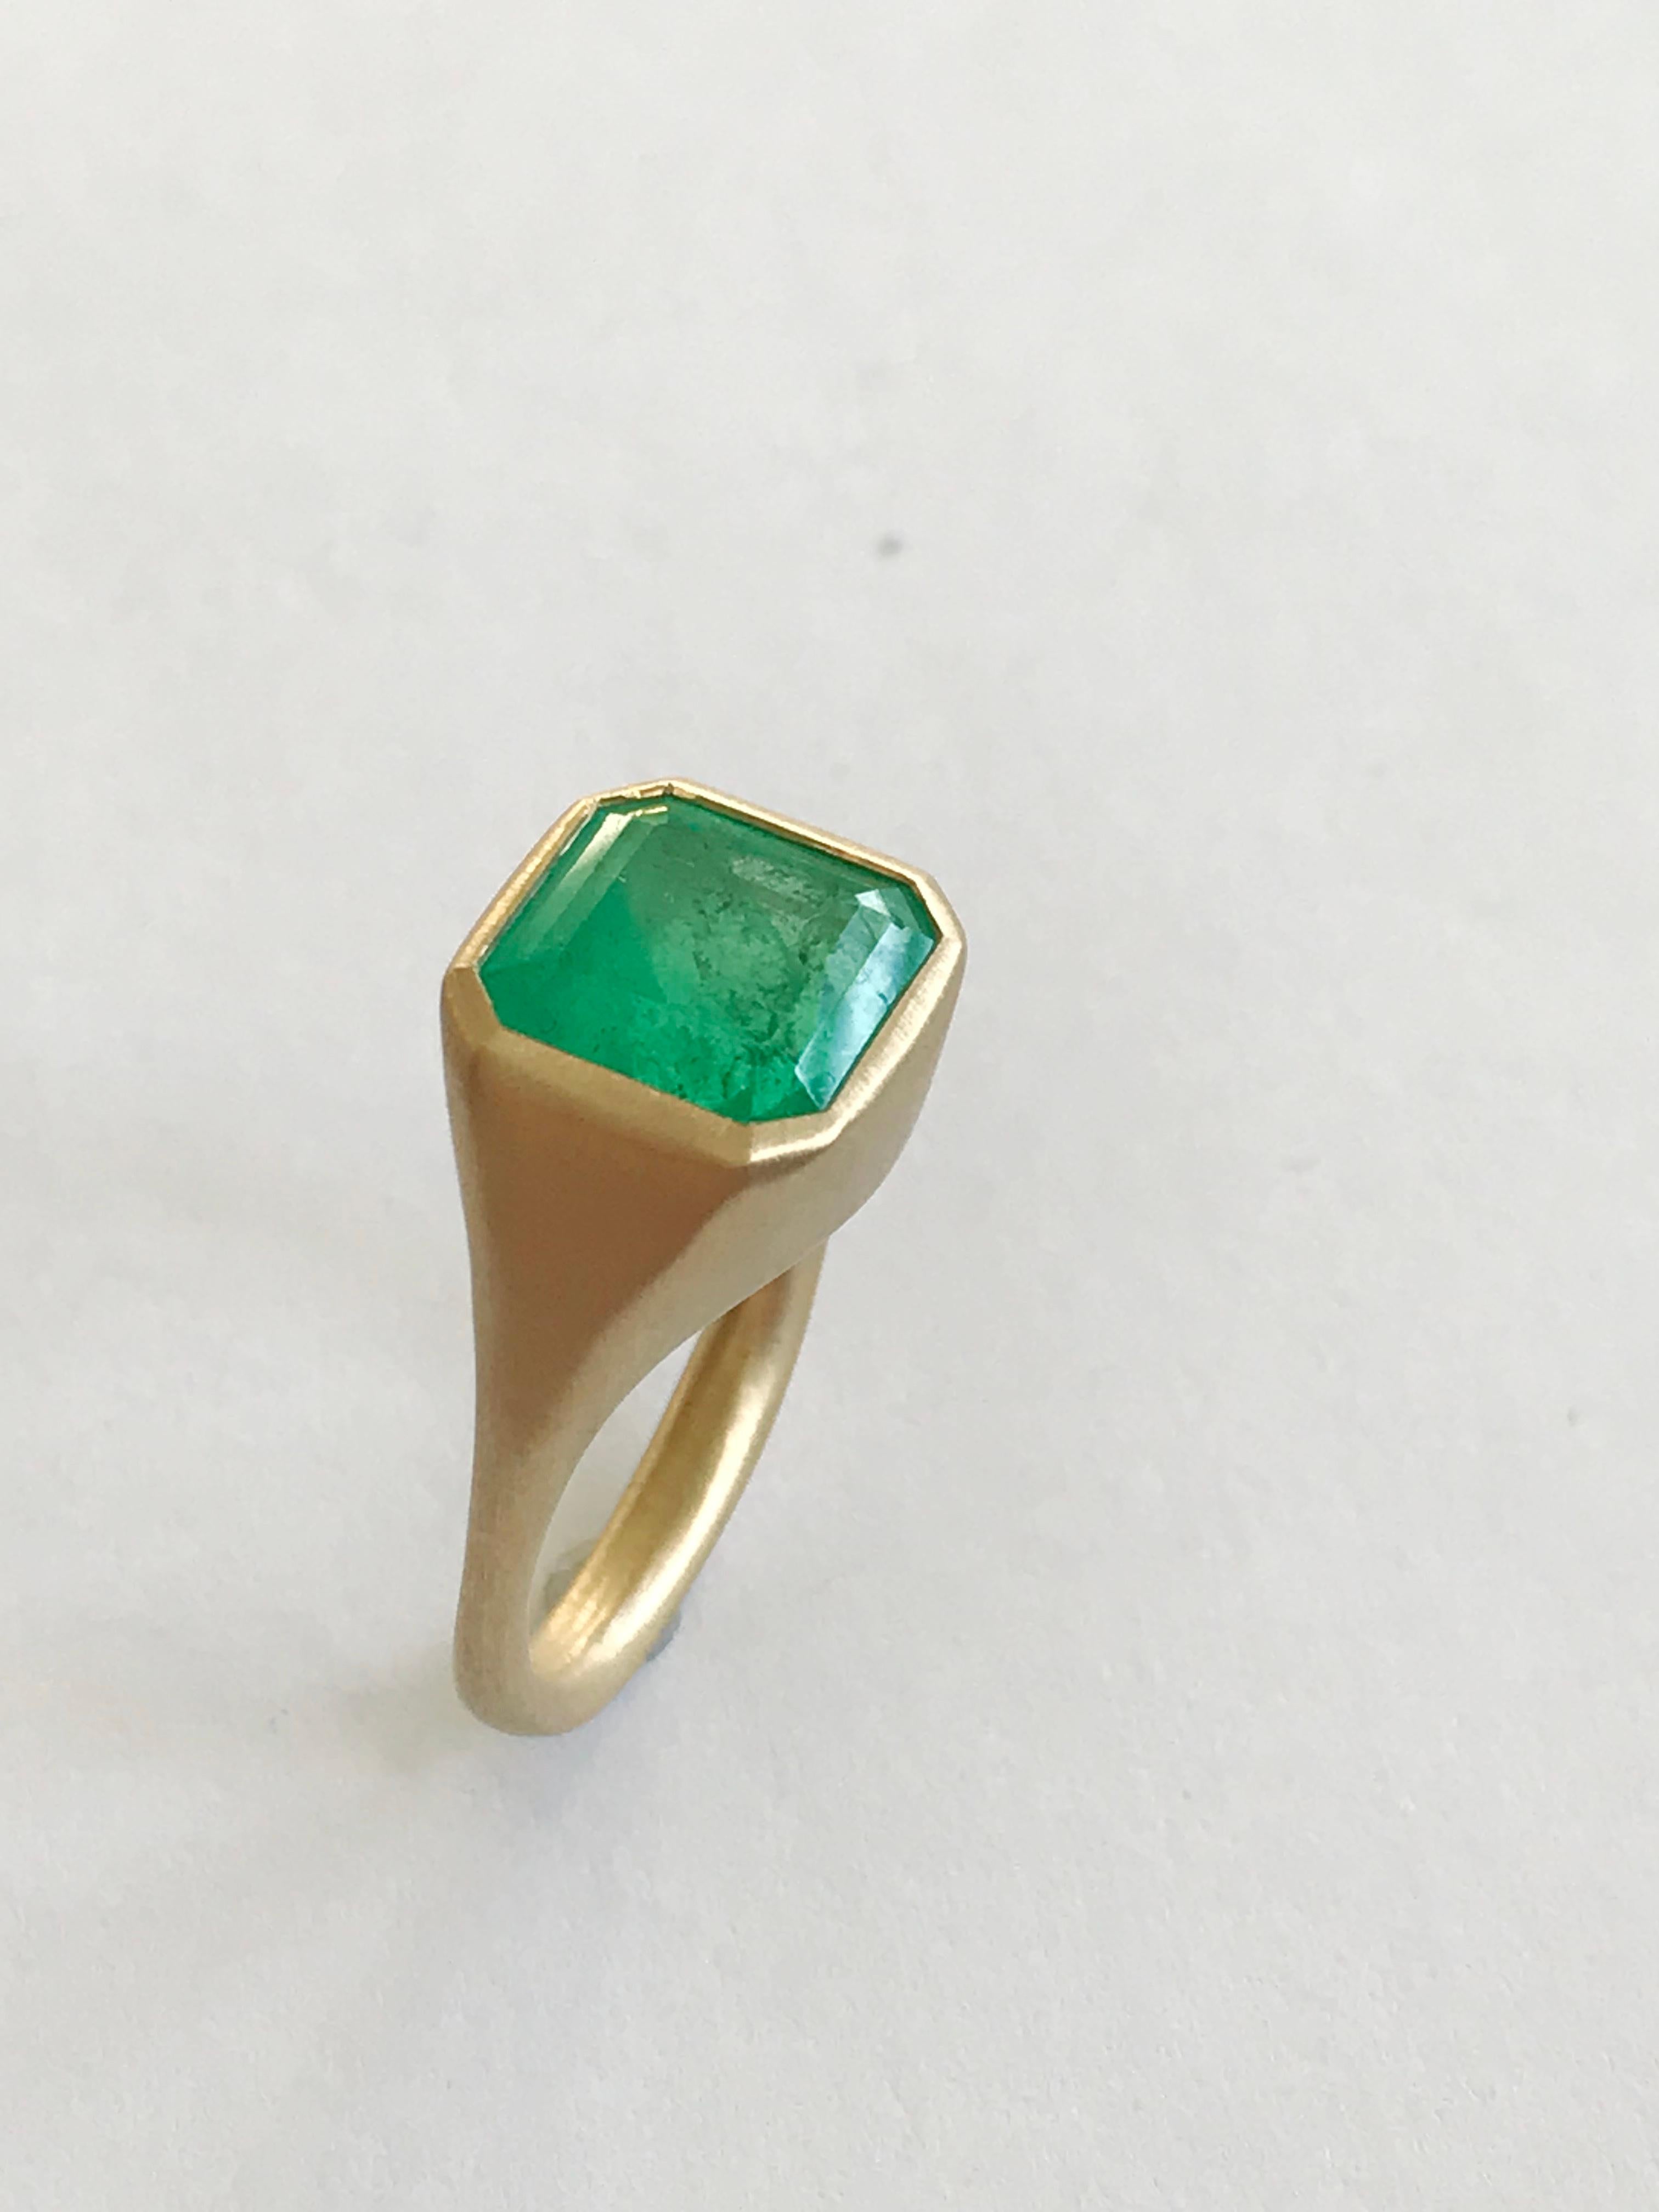 Dalben 4, 12 Carat Colombian Emerald Yellow Gold Ring For Sale 6